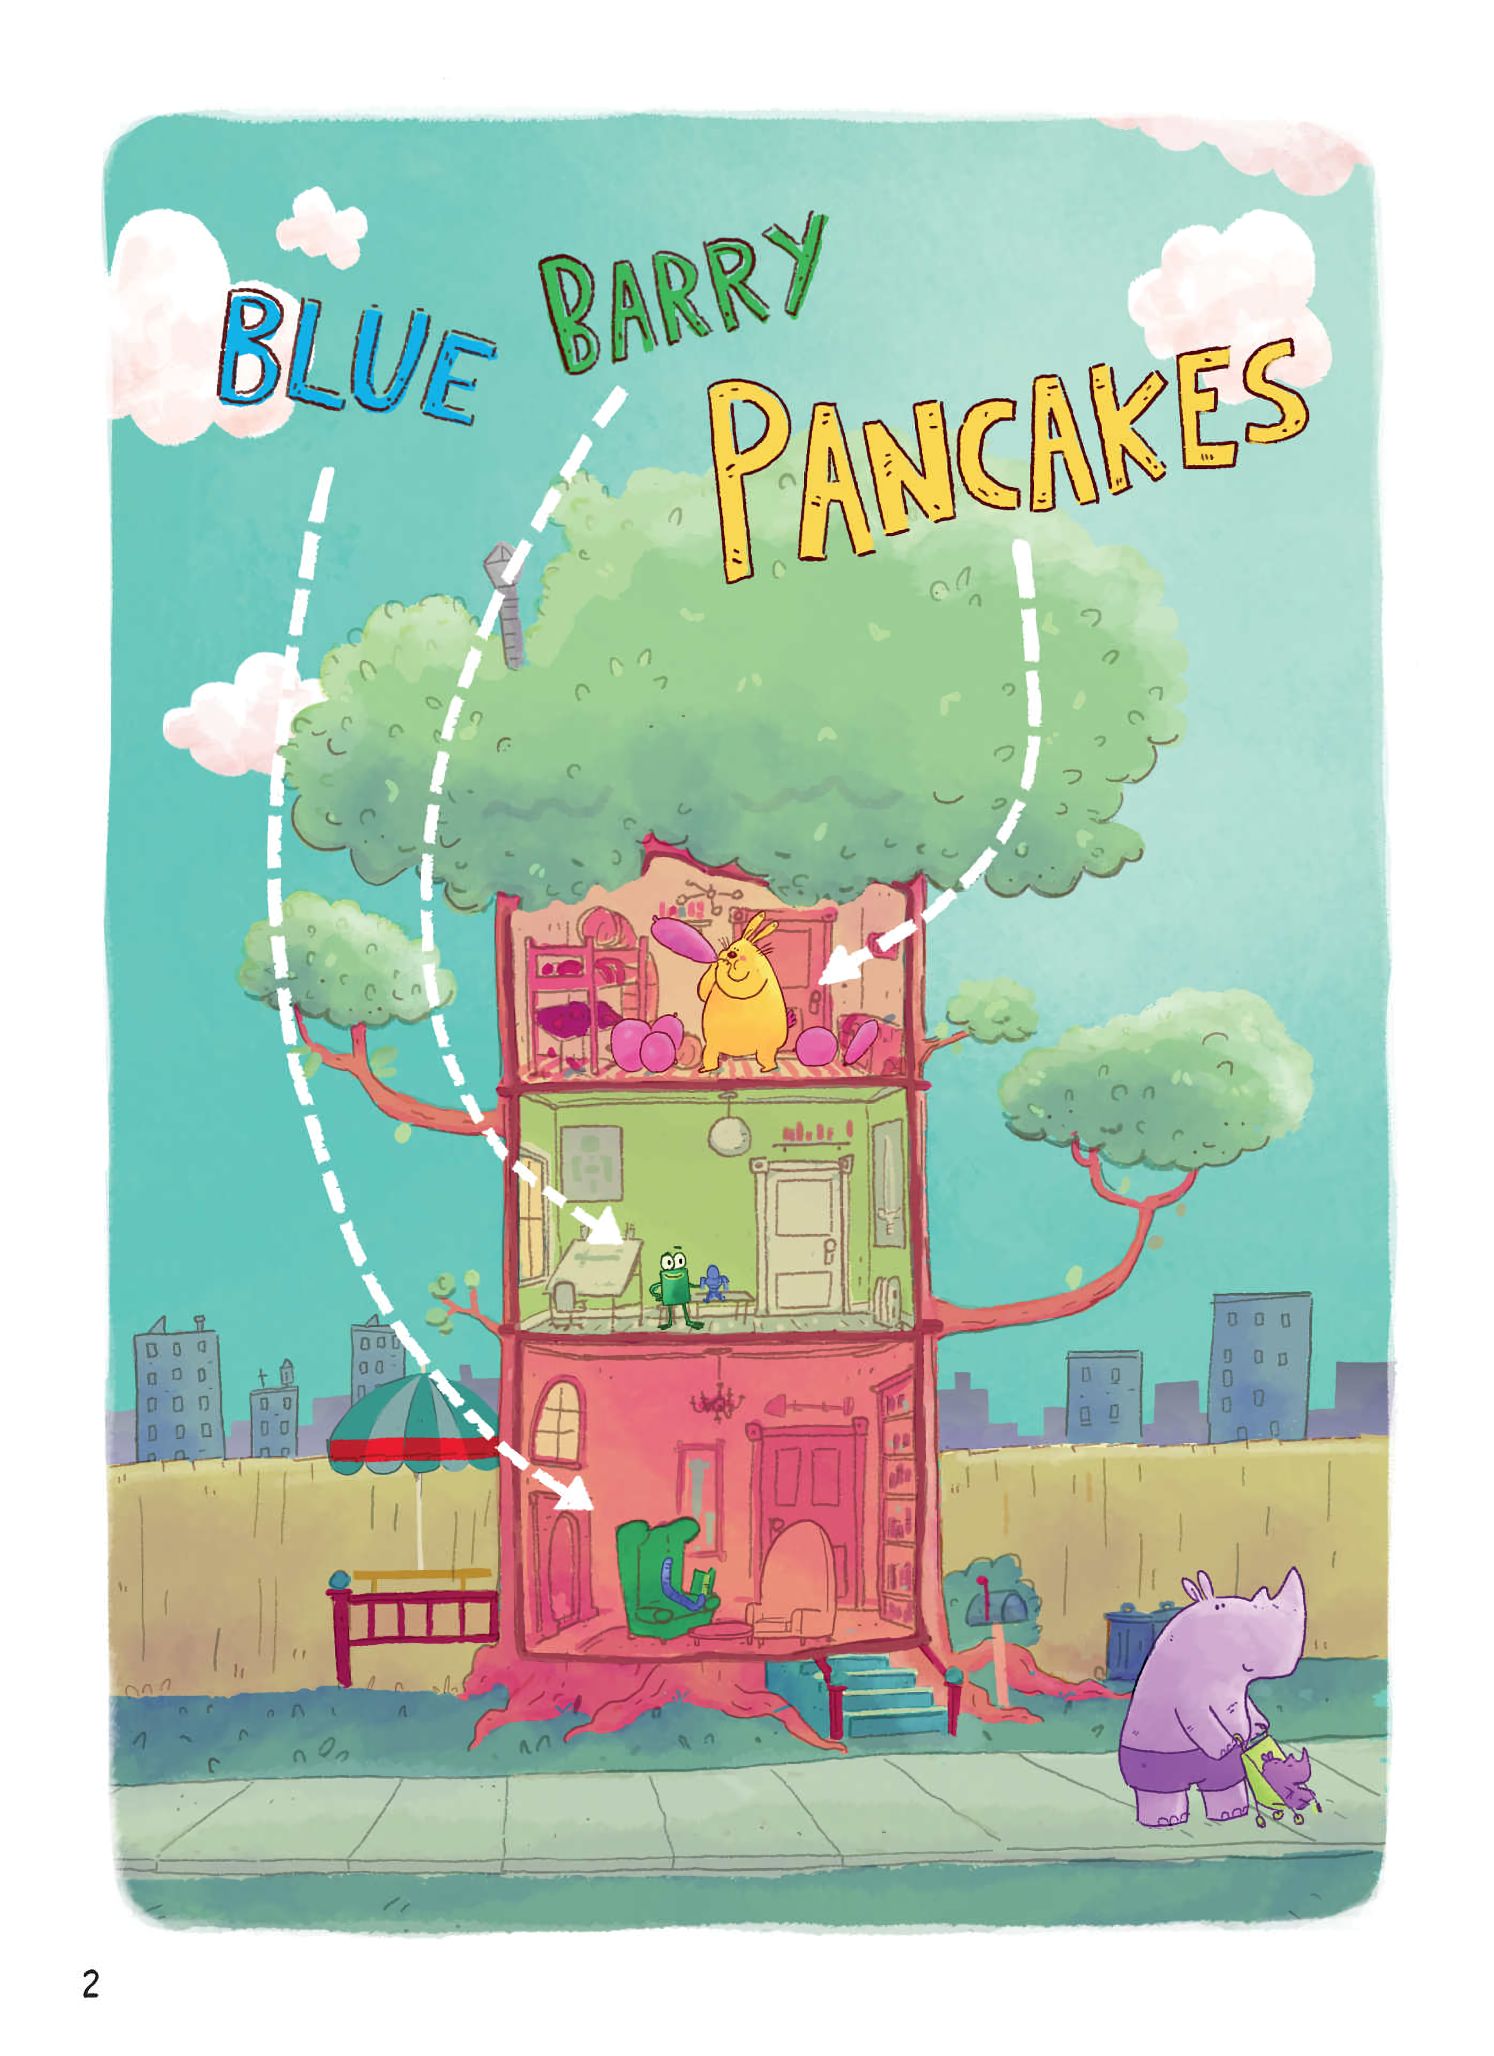 Read online Blue, Barry & Pancakes comic -  Issue # TPB 2 - 8